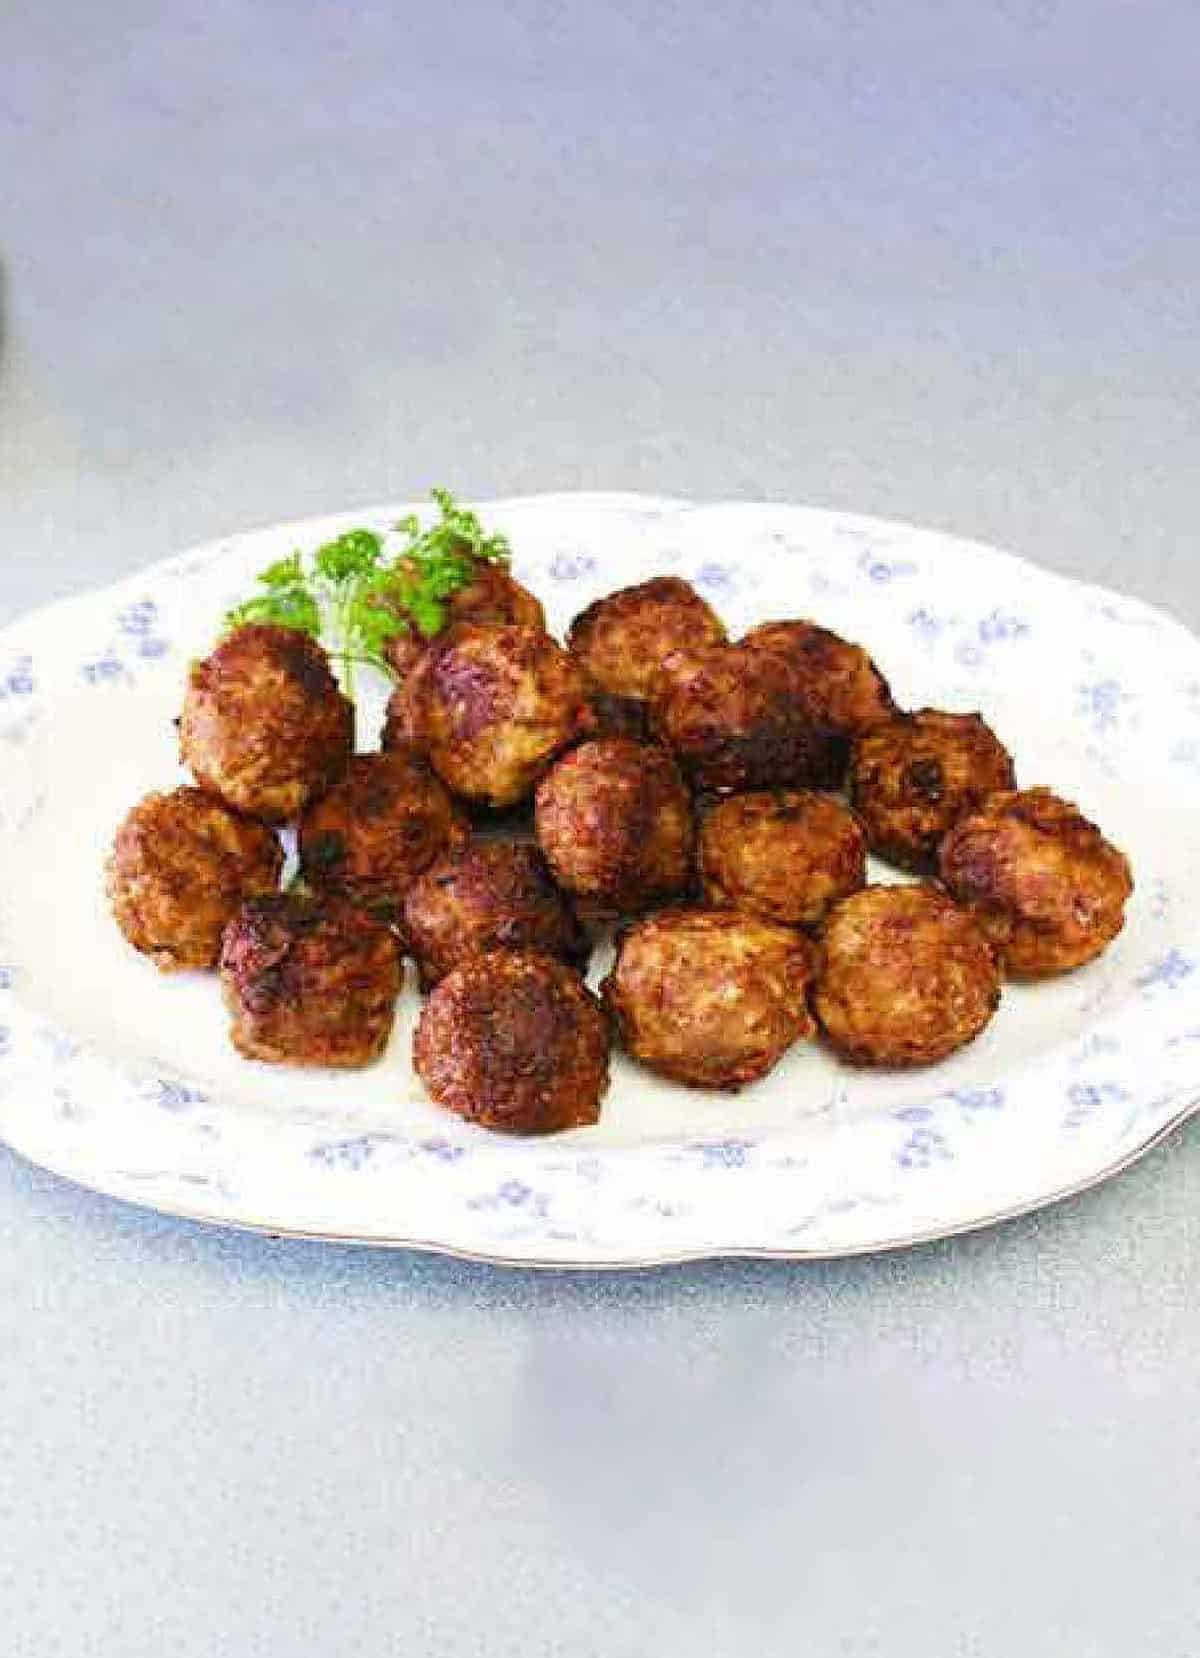  You can practically taste the traditional spices used in these meatballs just by looking at them.